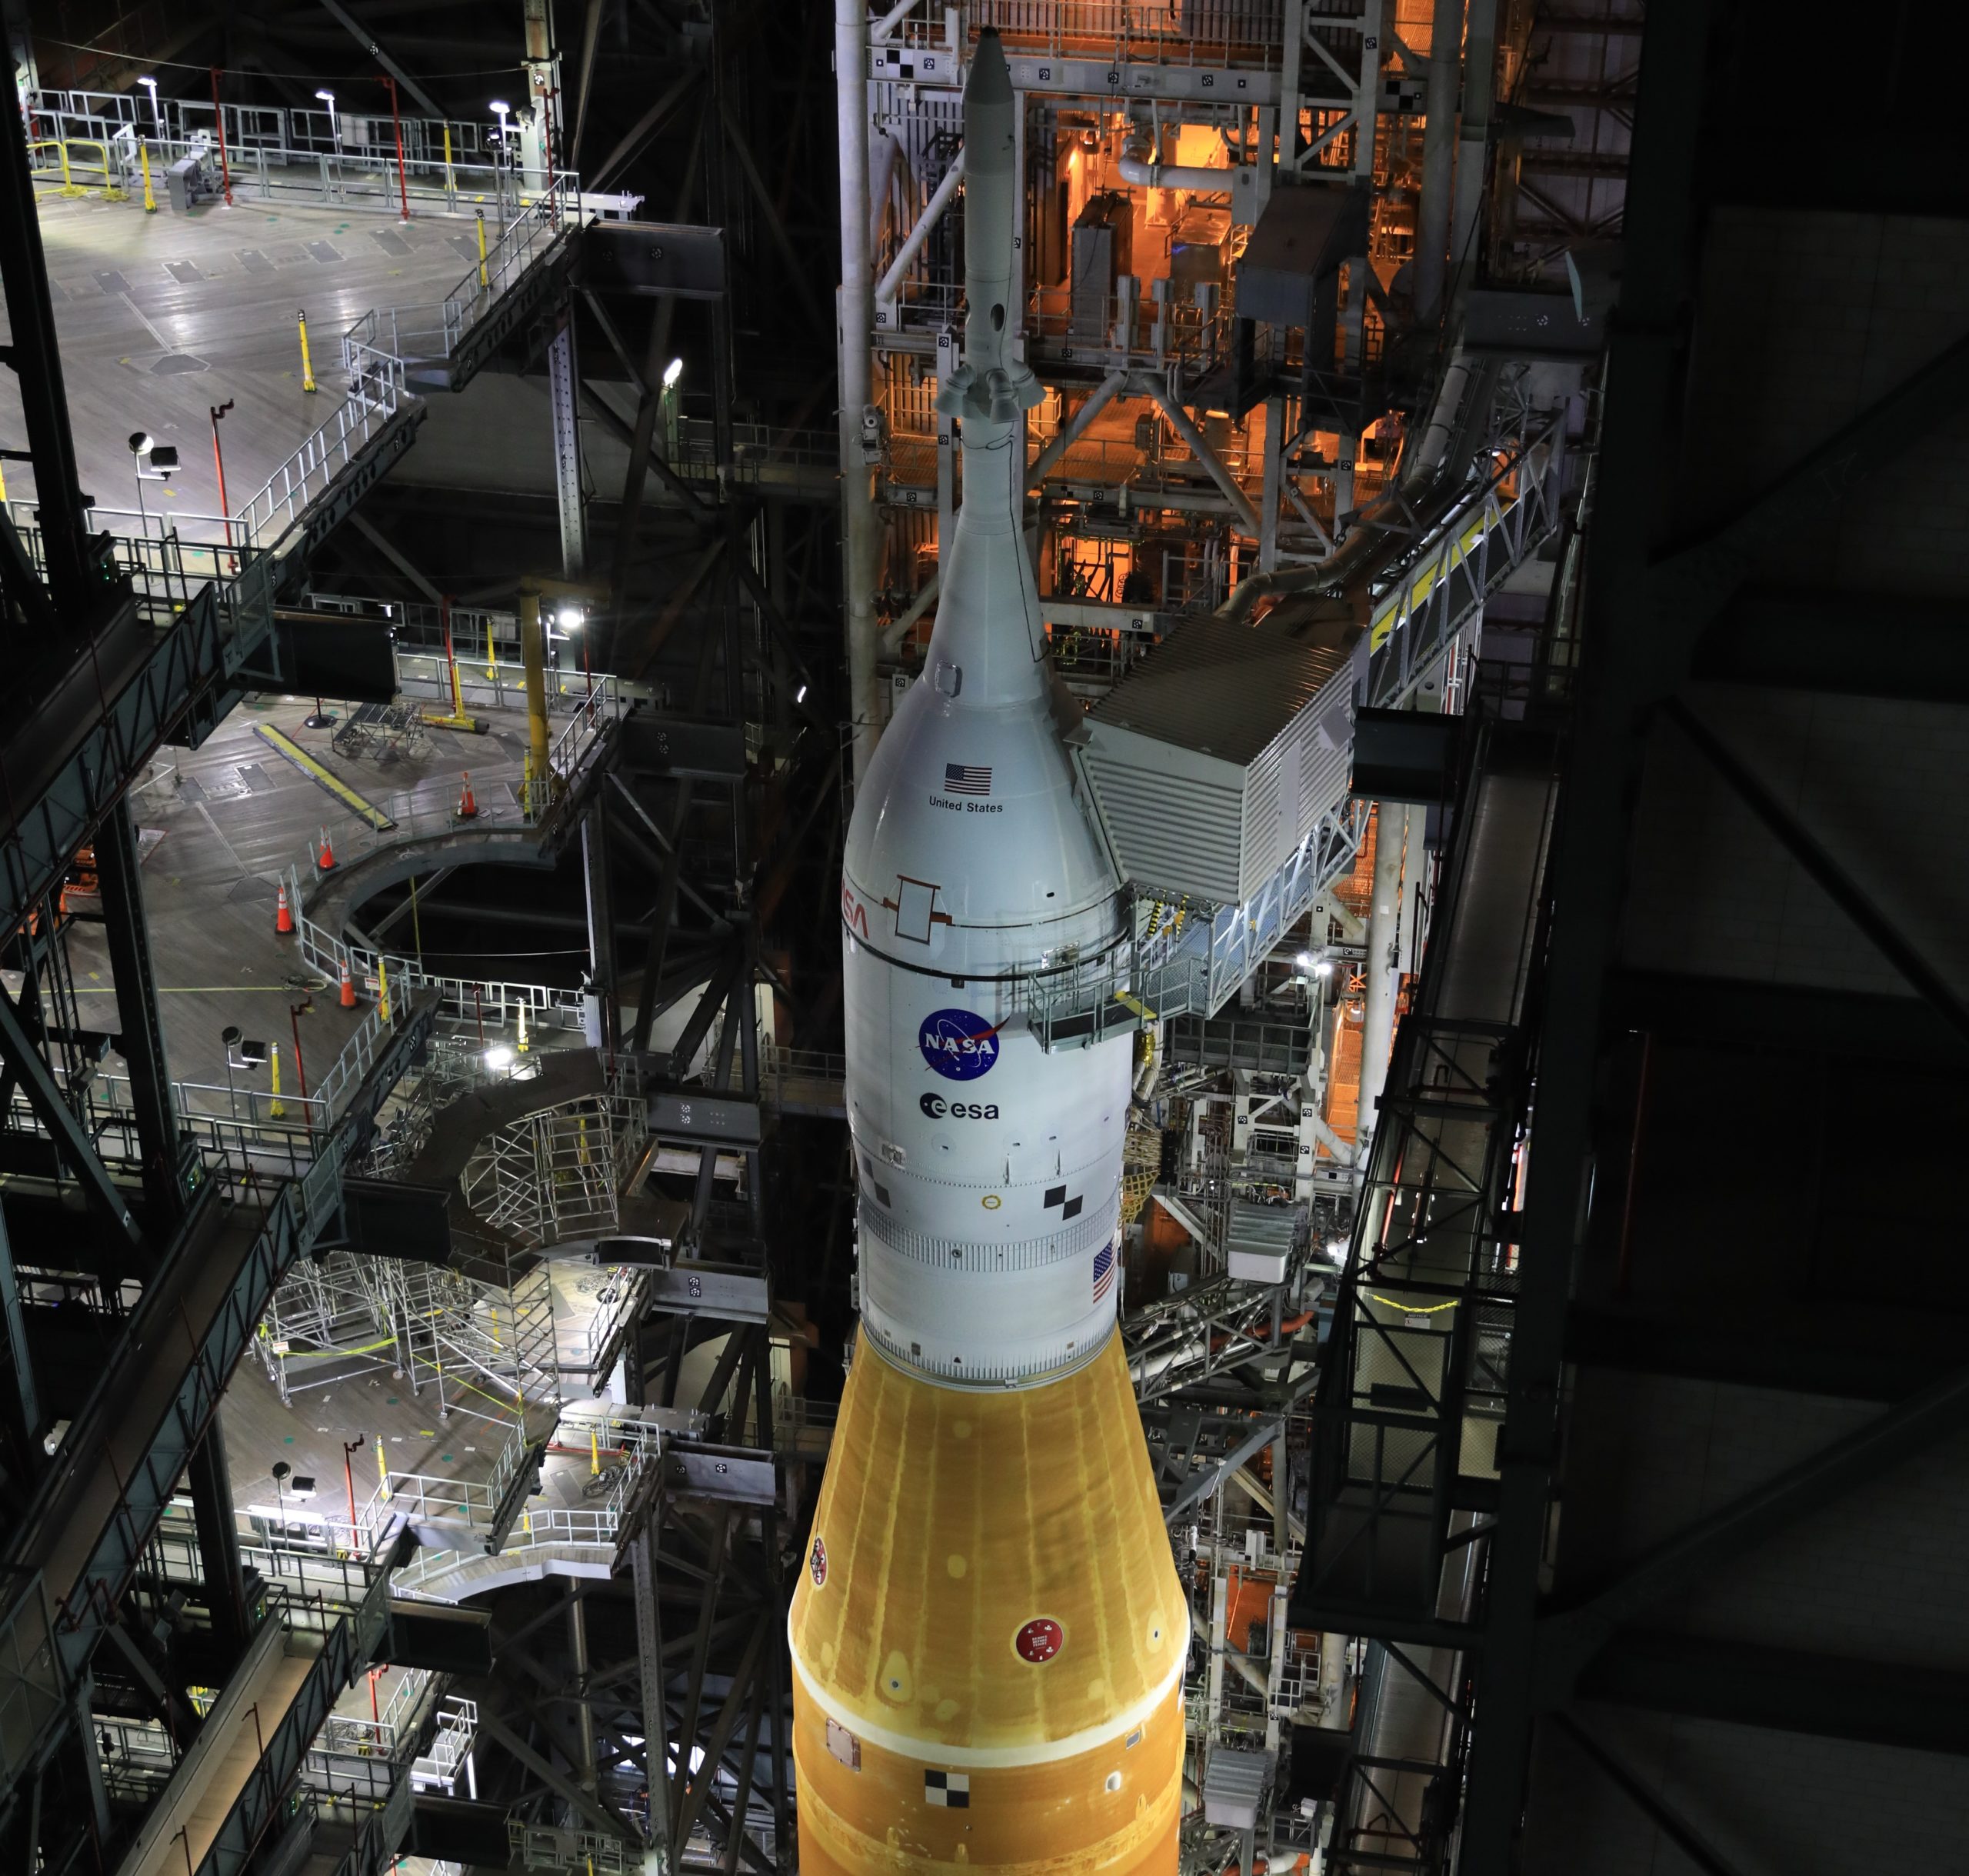 NASA’s Maiden SLS Moon Rocket Ready for Rollout to KSC Launch Pad